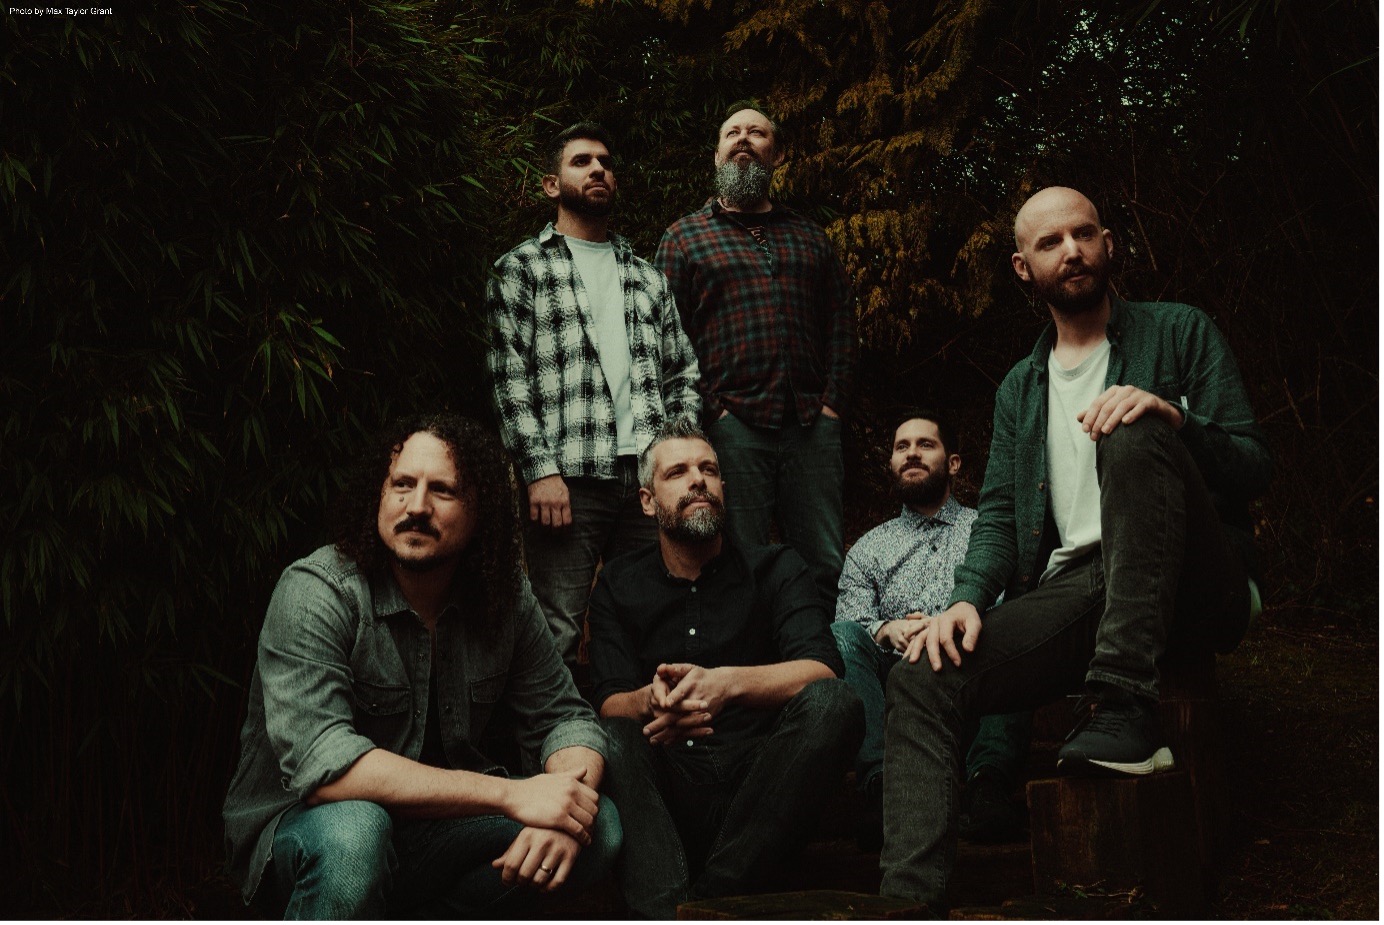 HAKEN members share their first and favorite concerts ahead of North  American headlining tour - The Prog Report